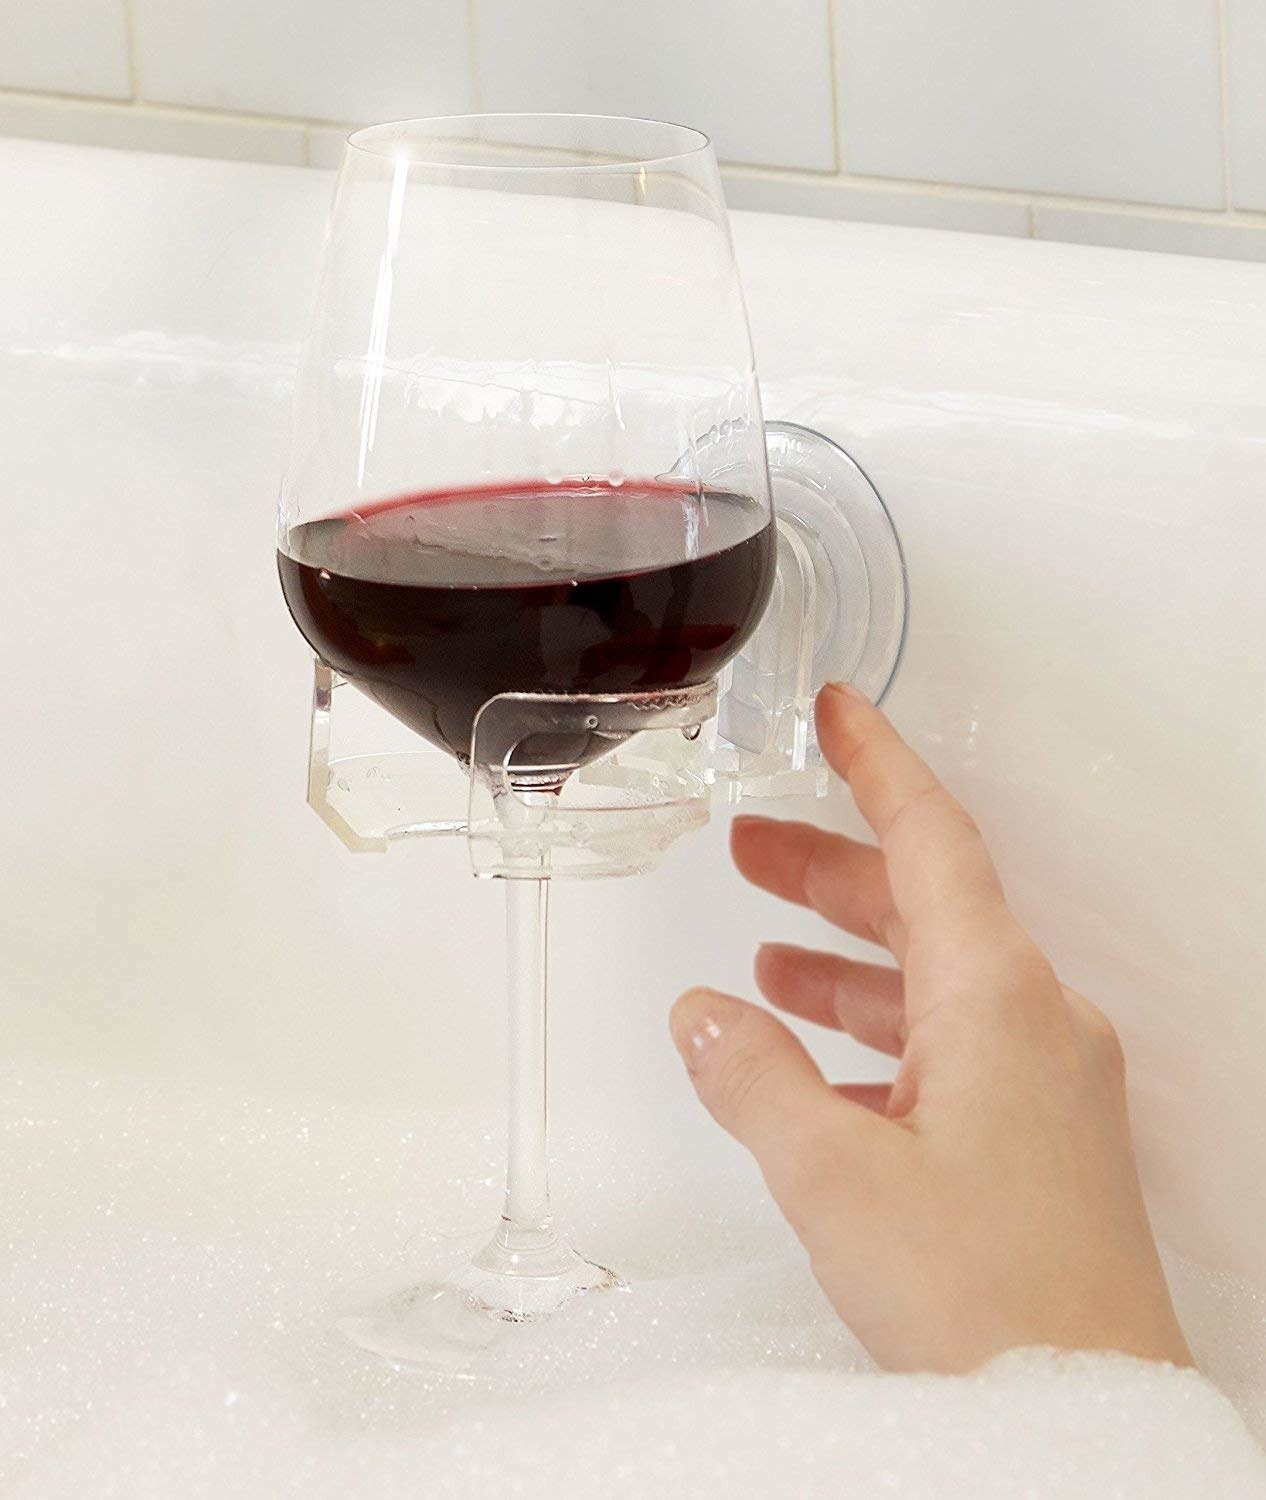 the wine holder mounted on a tub surround with a wine glass